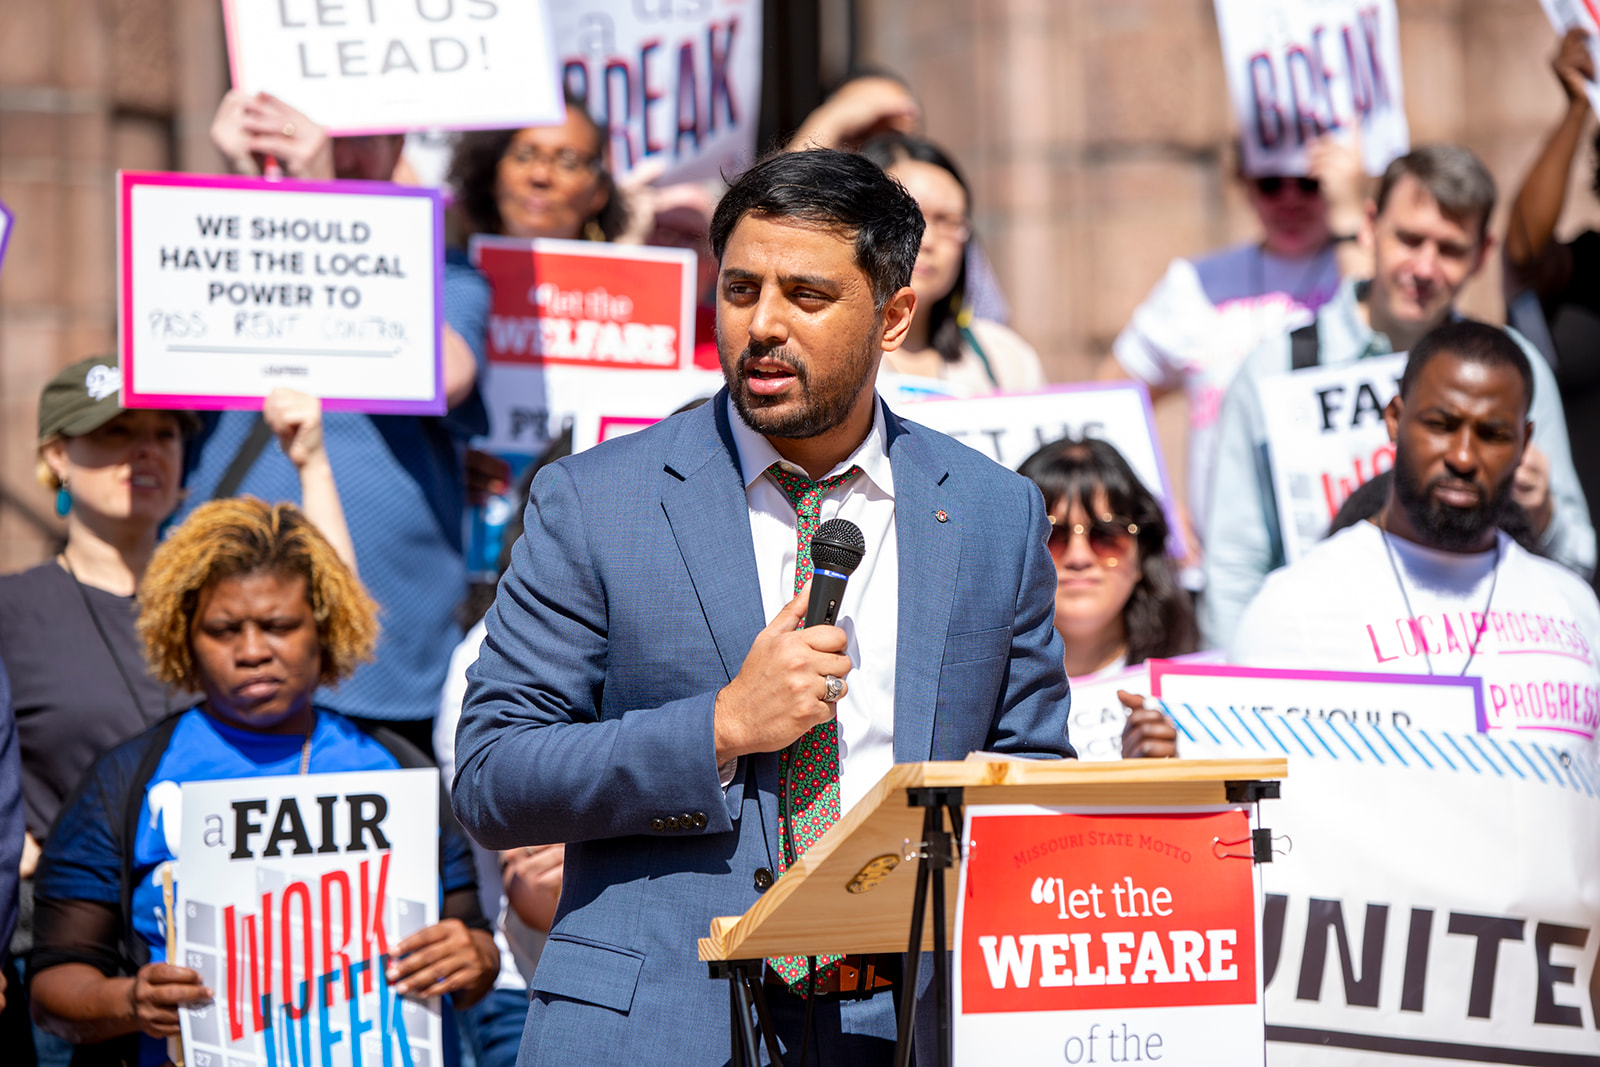 LPTX member and Austin City Councilmember Zohaib “Zo” Qadri speaking at a rally for local democracy in St. Louis, MO.